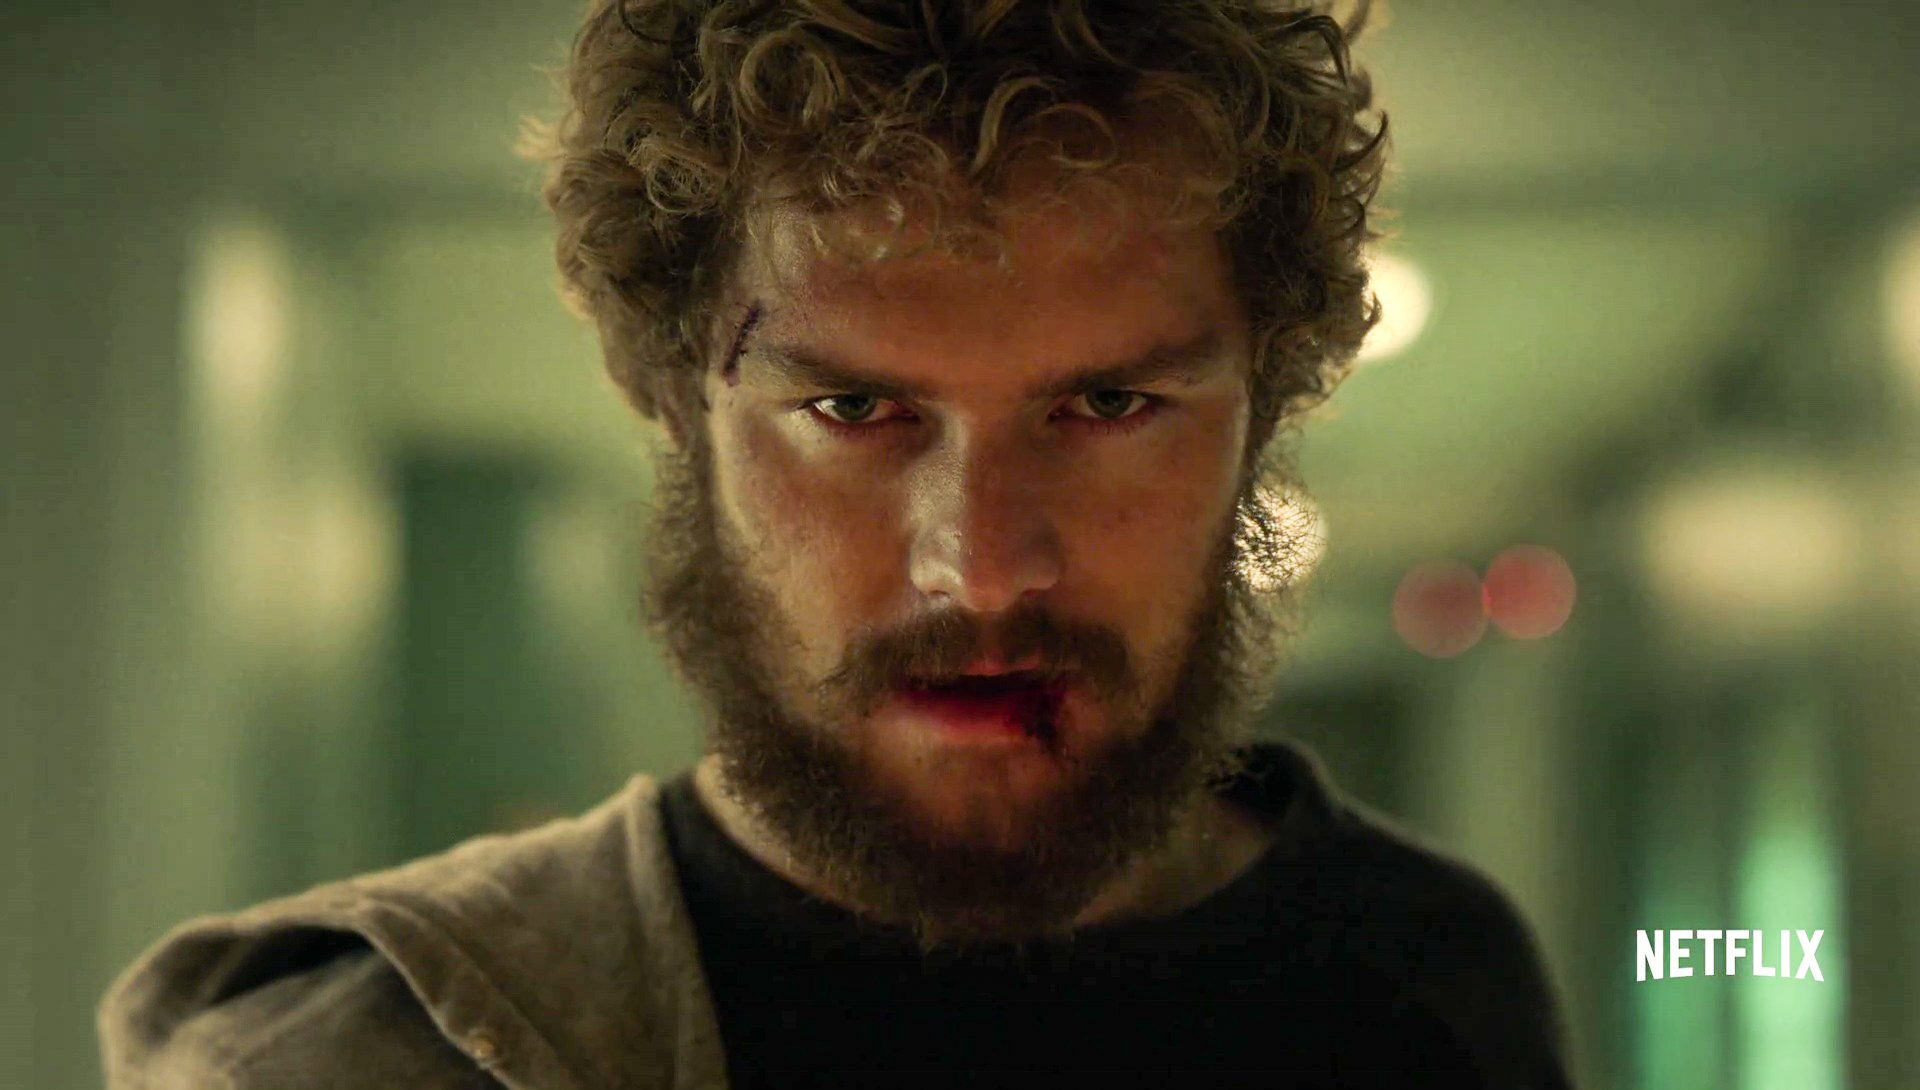 WATCH: First look at Marvel’s ‘Iron Fist’ series